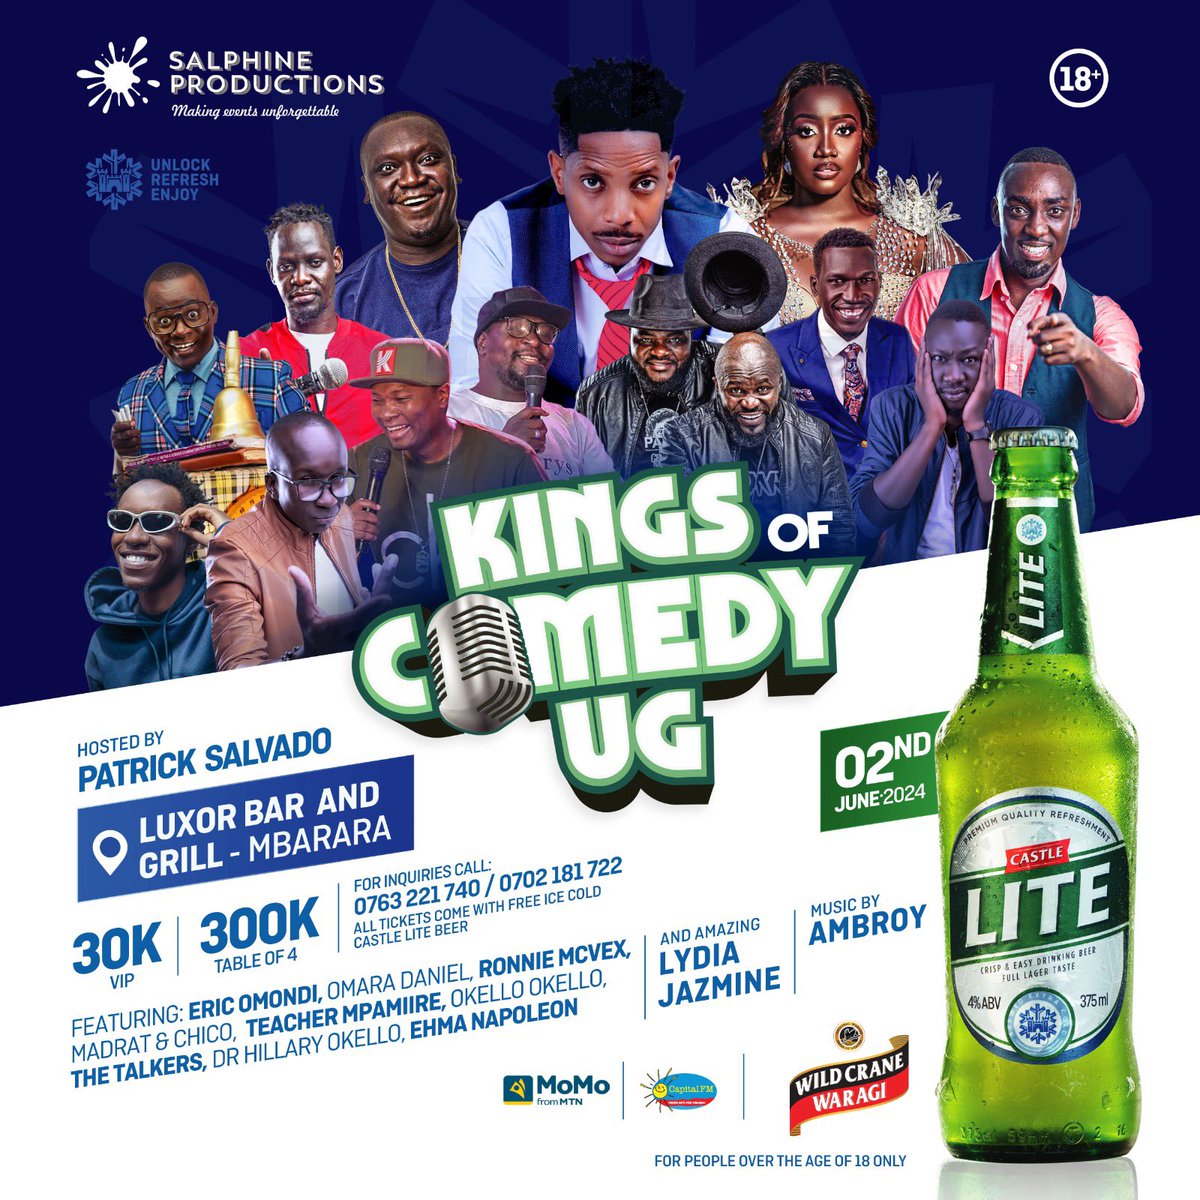 When life gives you lemons 🍋, we give you laughter 😂🤣 Check this poster for some of the nationally and internationally accredited acts heading to @MbararaCityUg on 2nd June @LuxorBarMbra for #KingsOfComedyUG headlined by @ericomondi_, hosted by @idringp, book tickets now!